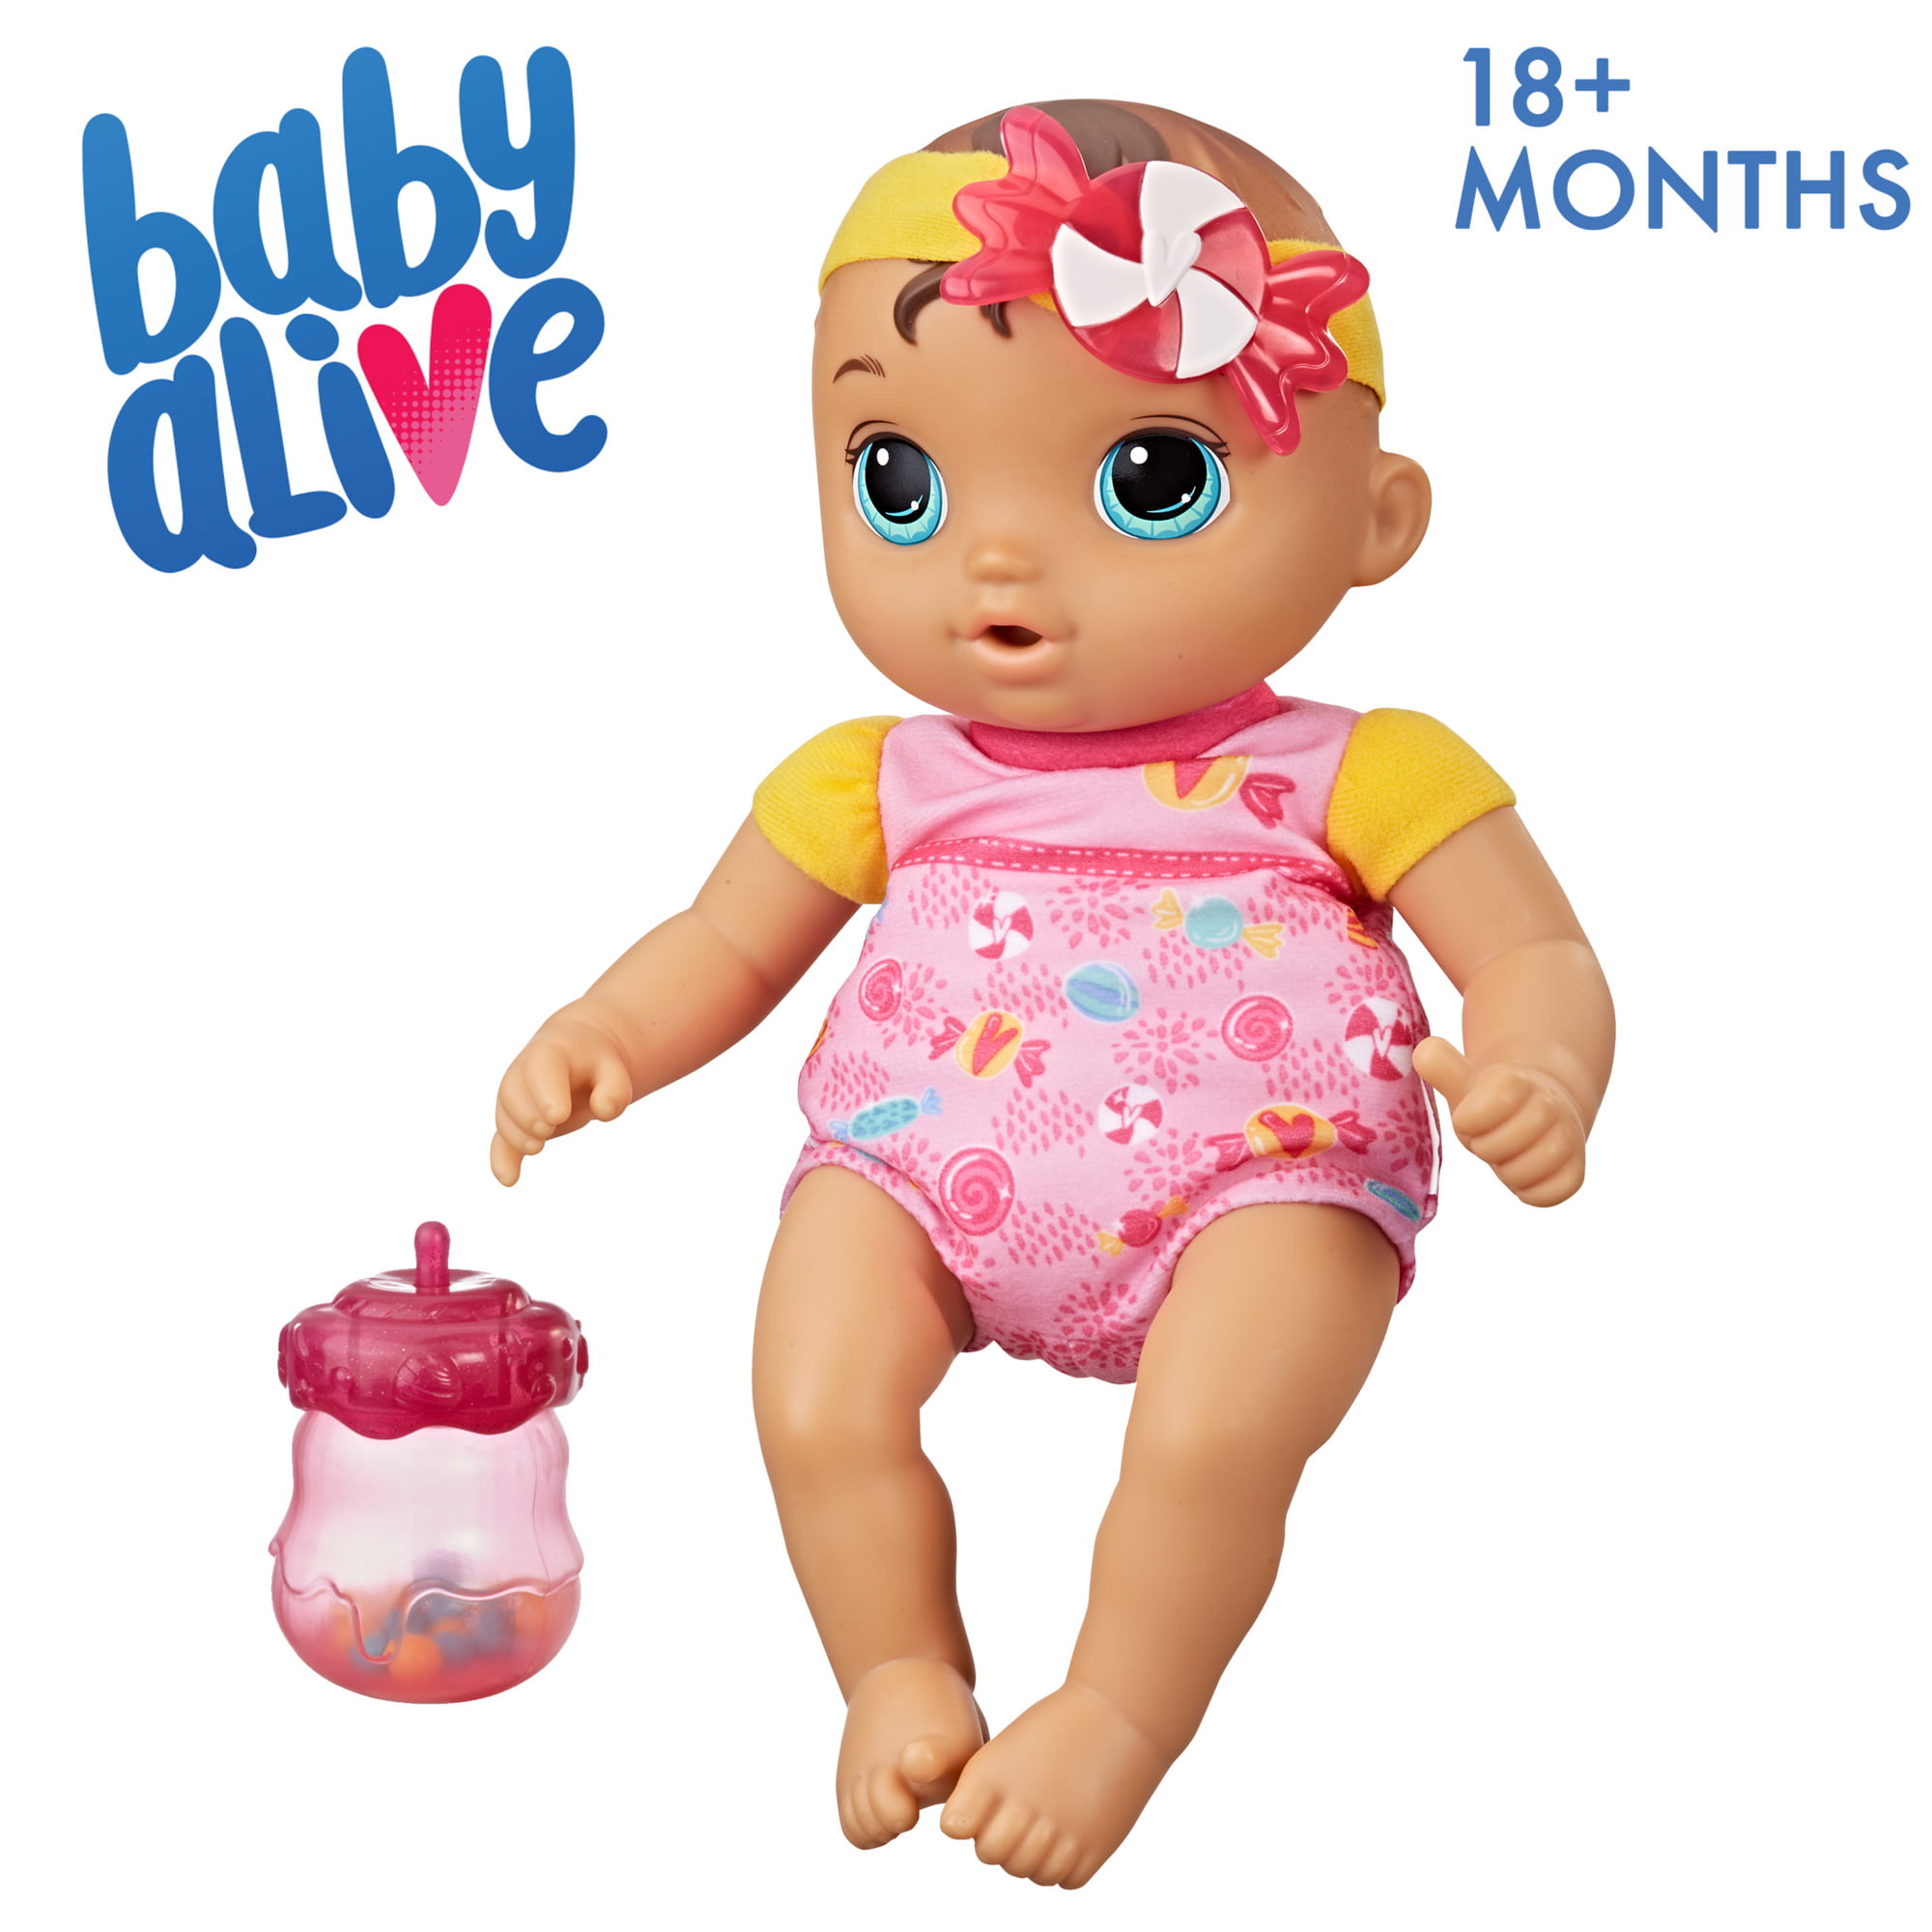 the first baby alive doll